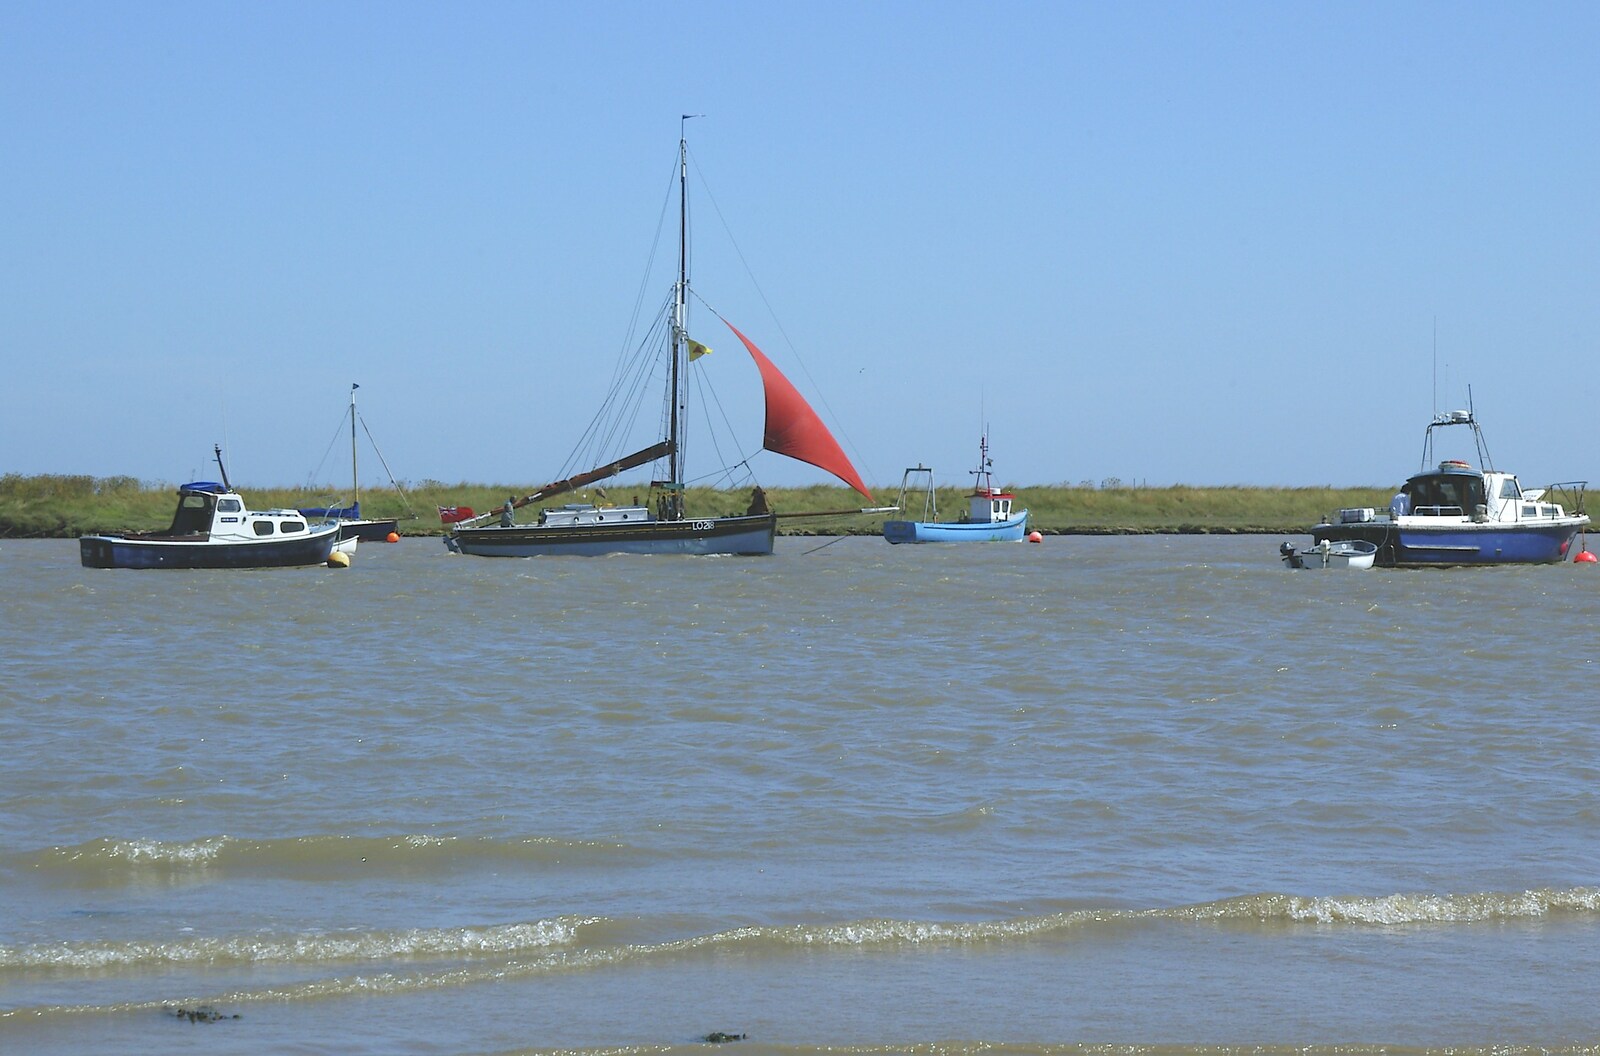 Boats on the river Ore from The BSCC Charity Bike Ride, Orford, Suffolk - 15th July 2006